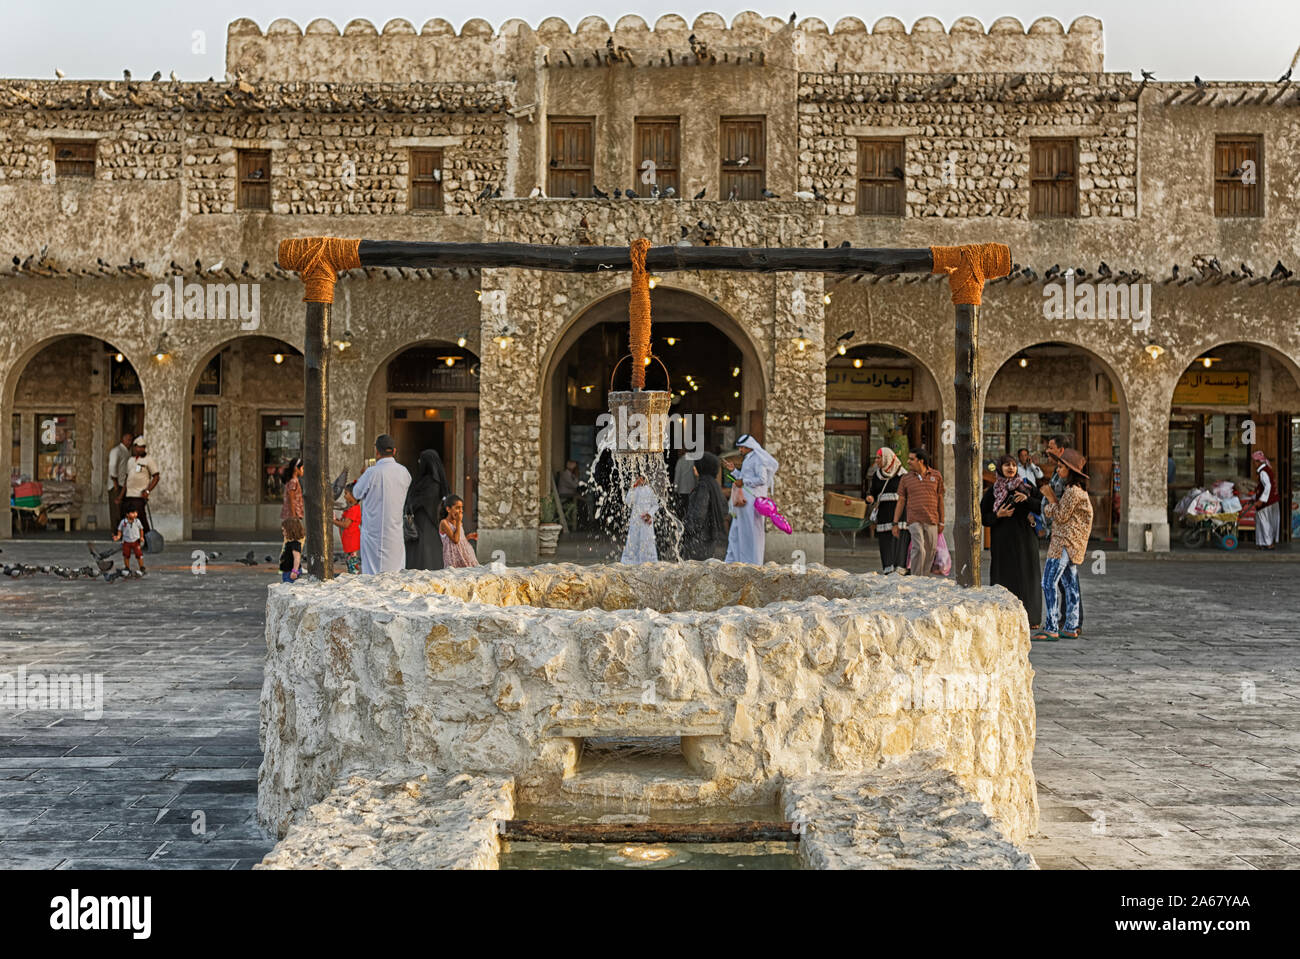 Doha,Qatar-March 30,2018: Souk Waqif  marketplace in Doha daylight view  with old well fountain in foreground Stock Photo